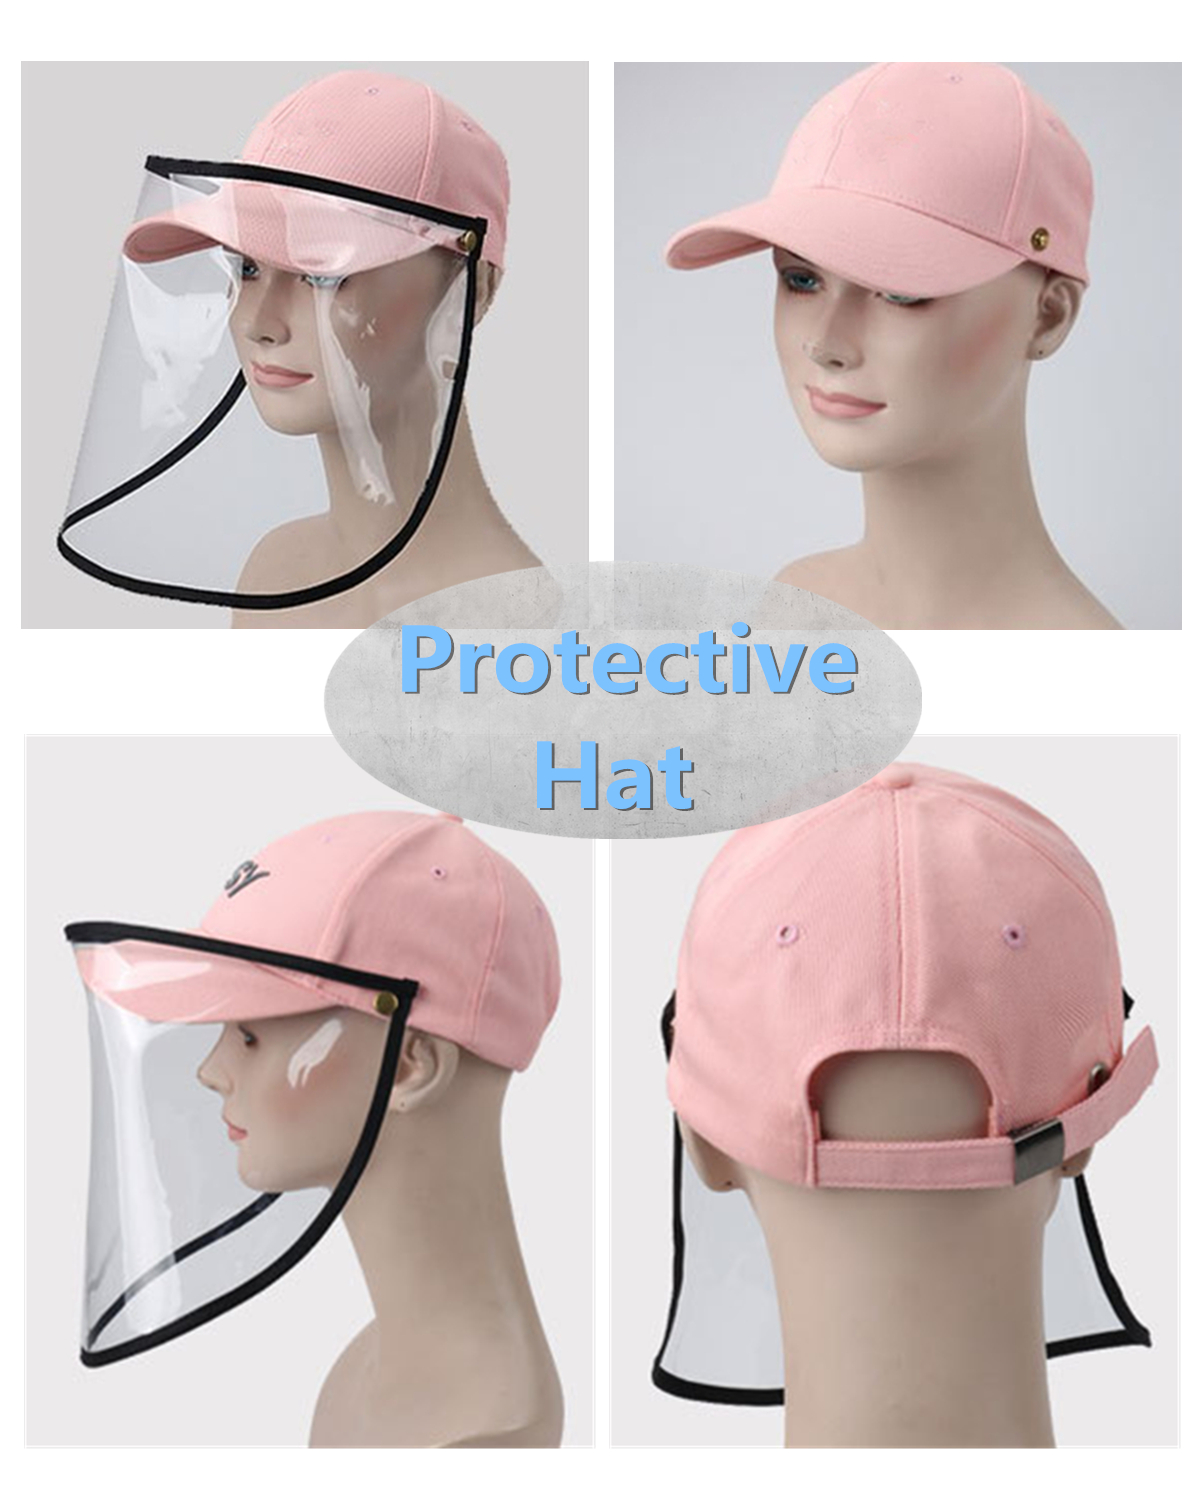 2-In1-Detachable-Double-Sides-Full-Face-Shield-with-Hat-Anti-Fog-Saliva-Dustproof-Protective-Cover-B-1670890-5